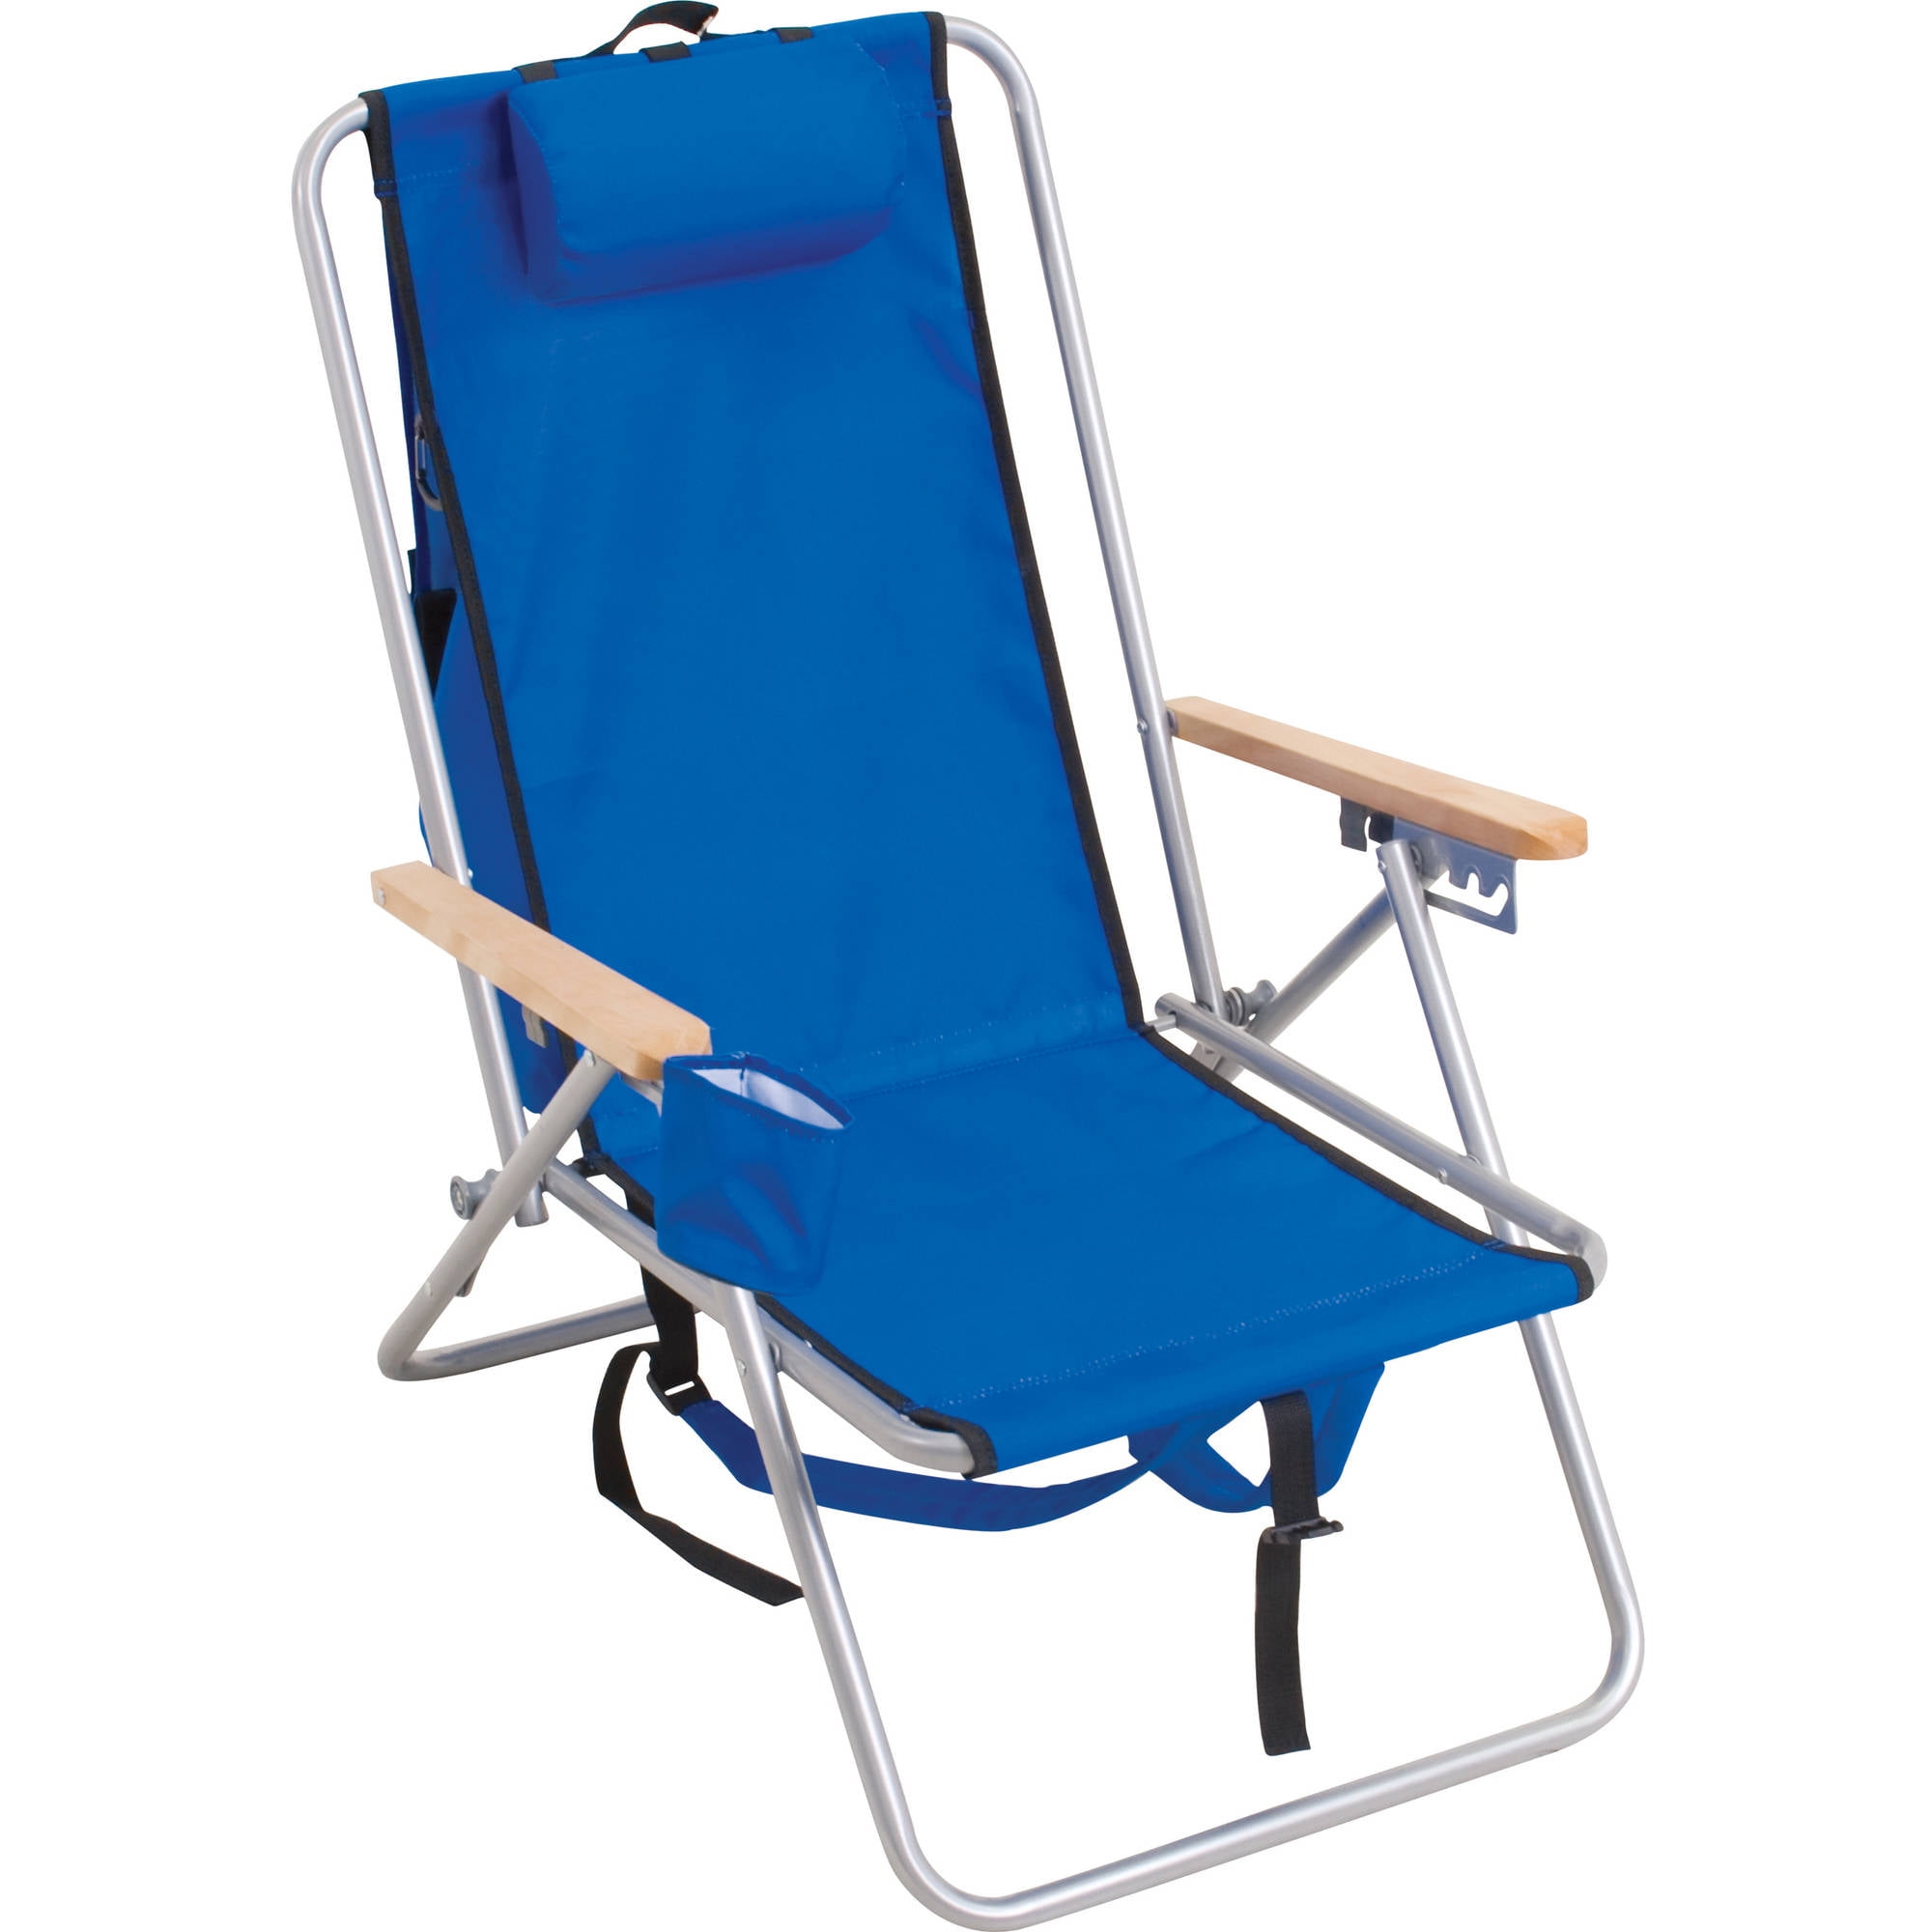 Creatice Big Boy Backpack Beach Chair for Large Space